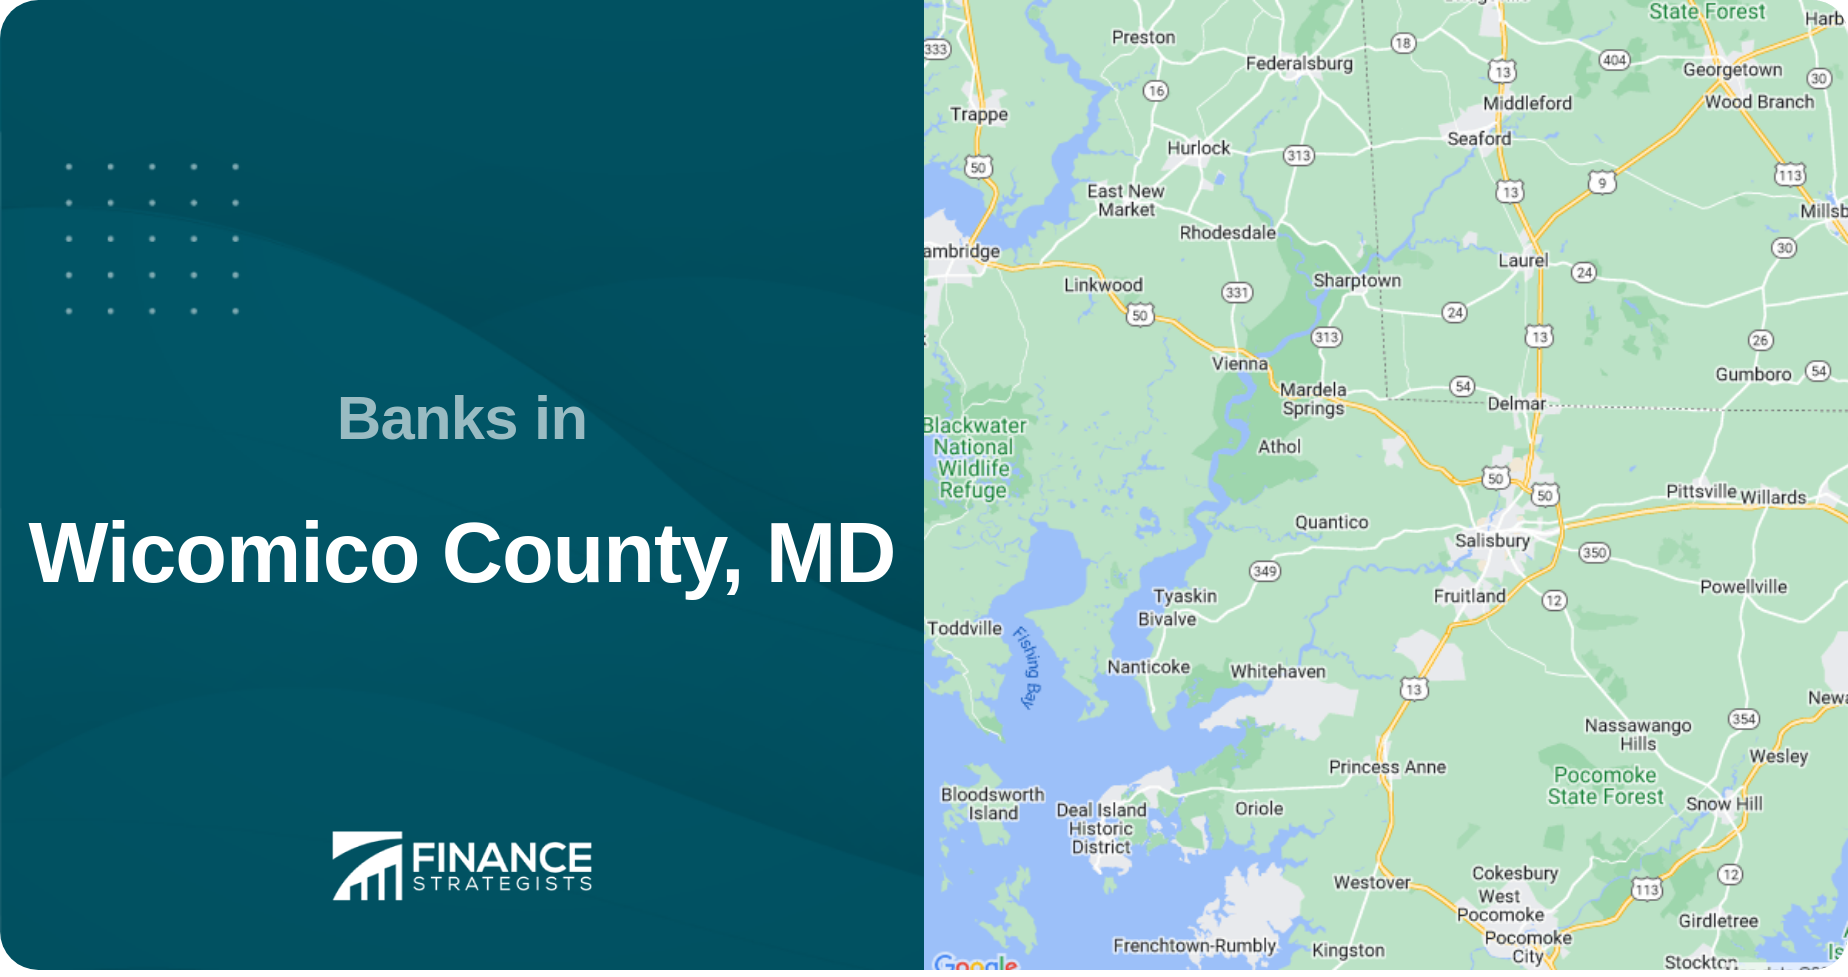 Banks in Wicomico County, MD